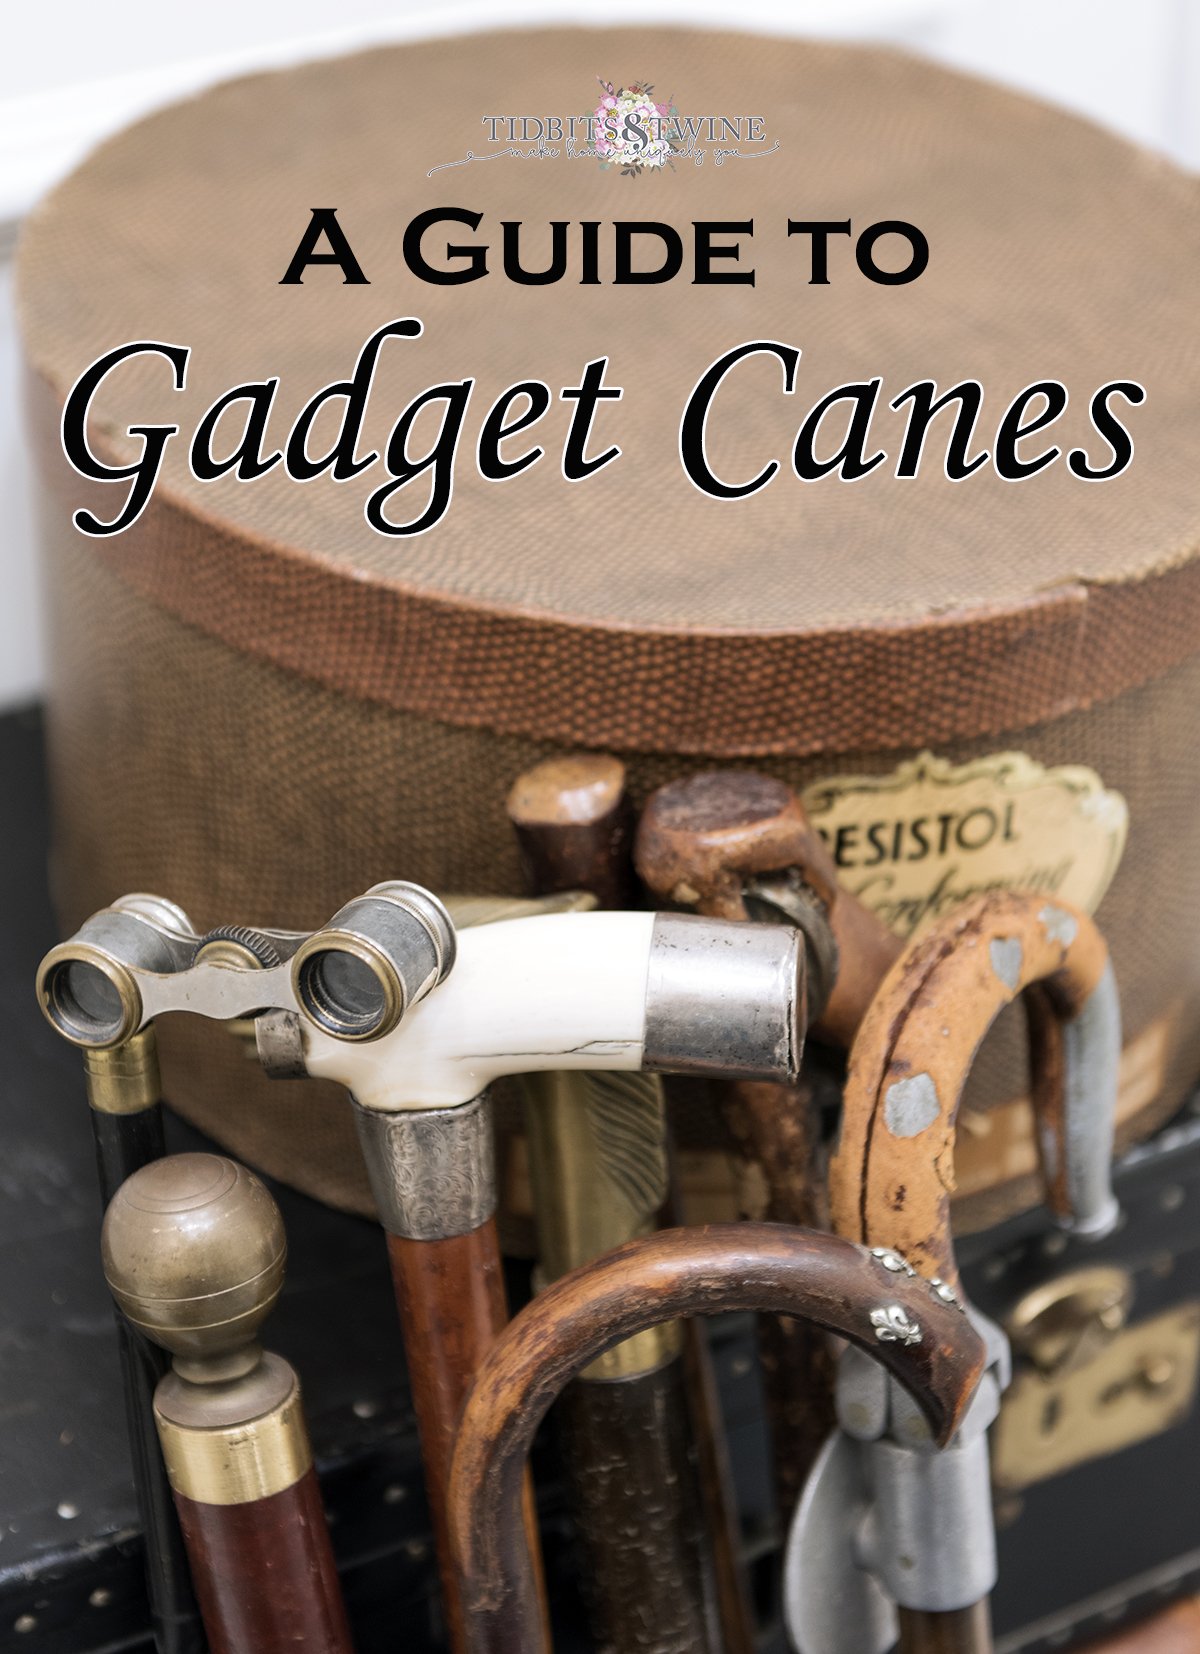 The Secret about Gadget Canes and Why You’ll Love Them!